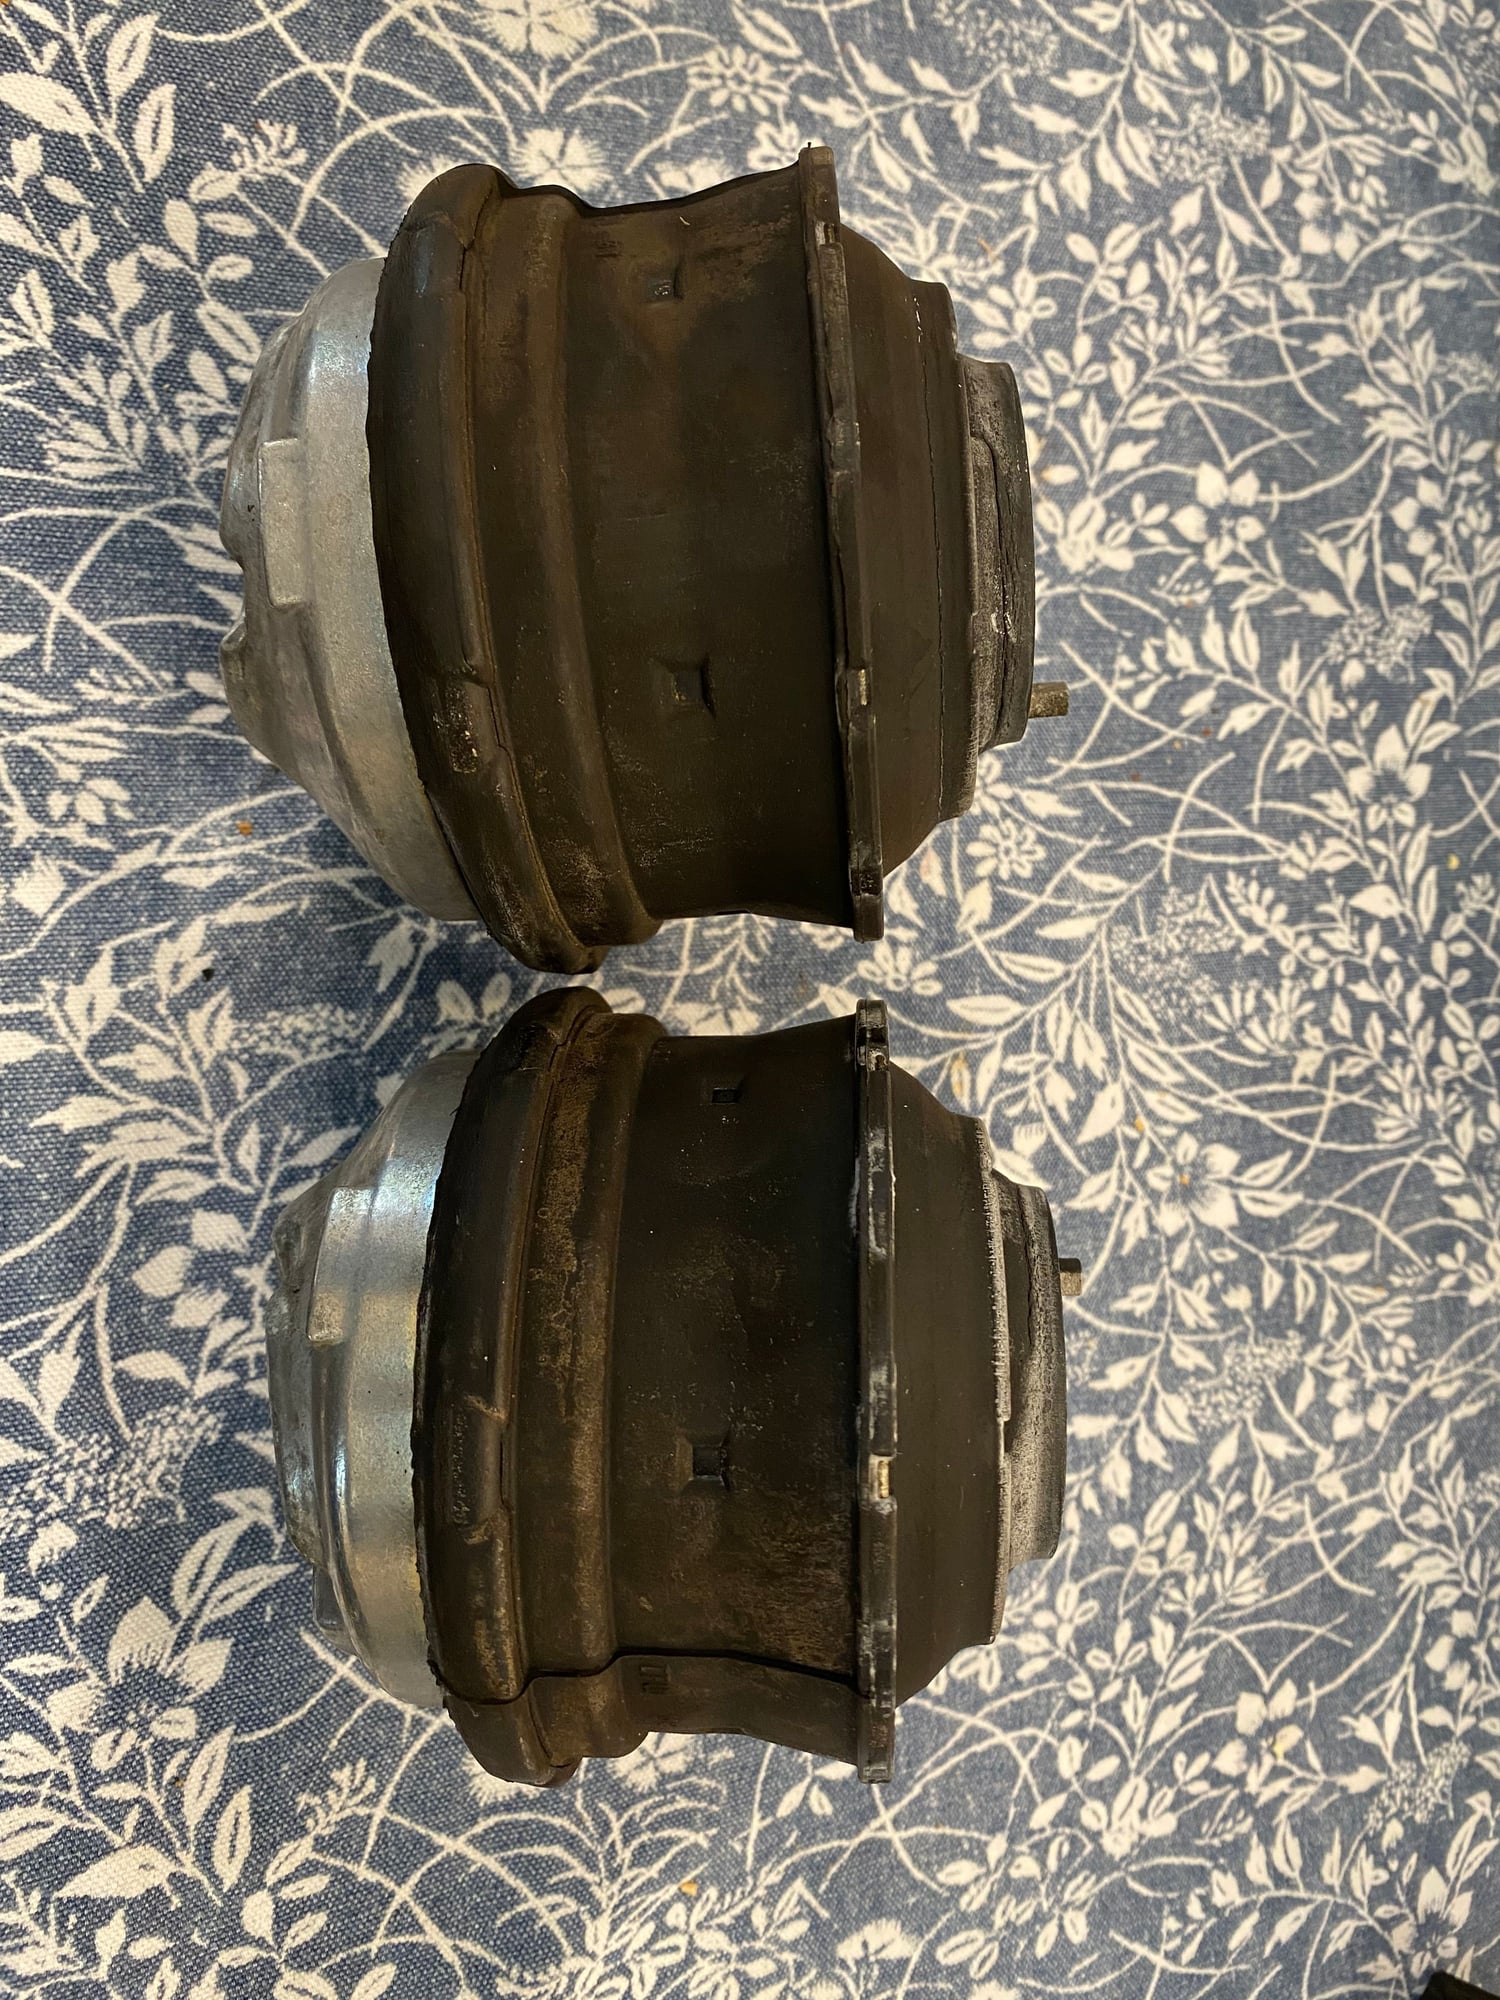 Miscellaneous - R230 SL63 Motor Mounts - Used - All Years  All Models - Lake Wylie, SC 29710, United States